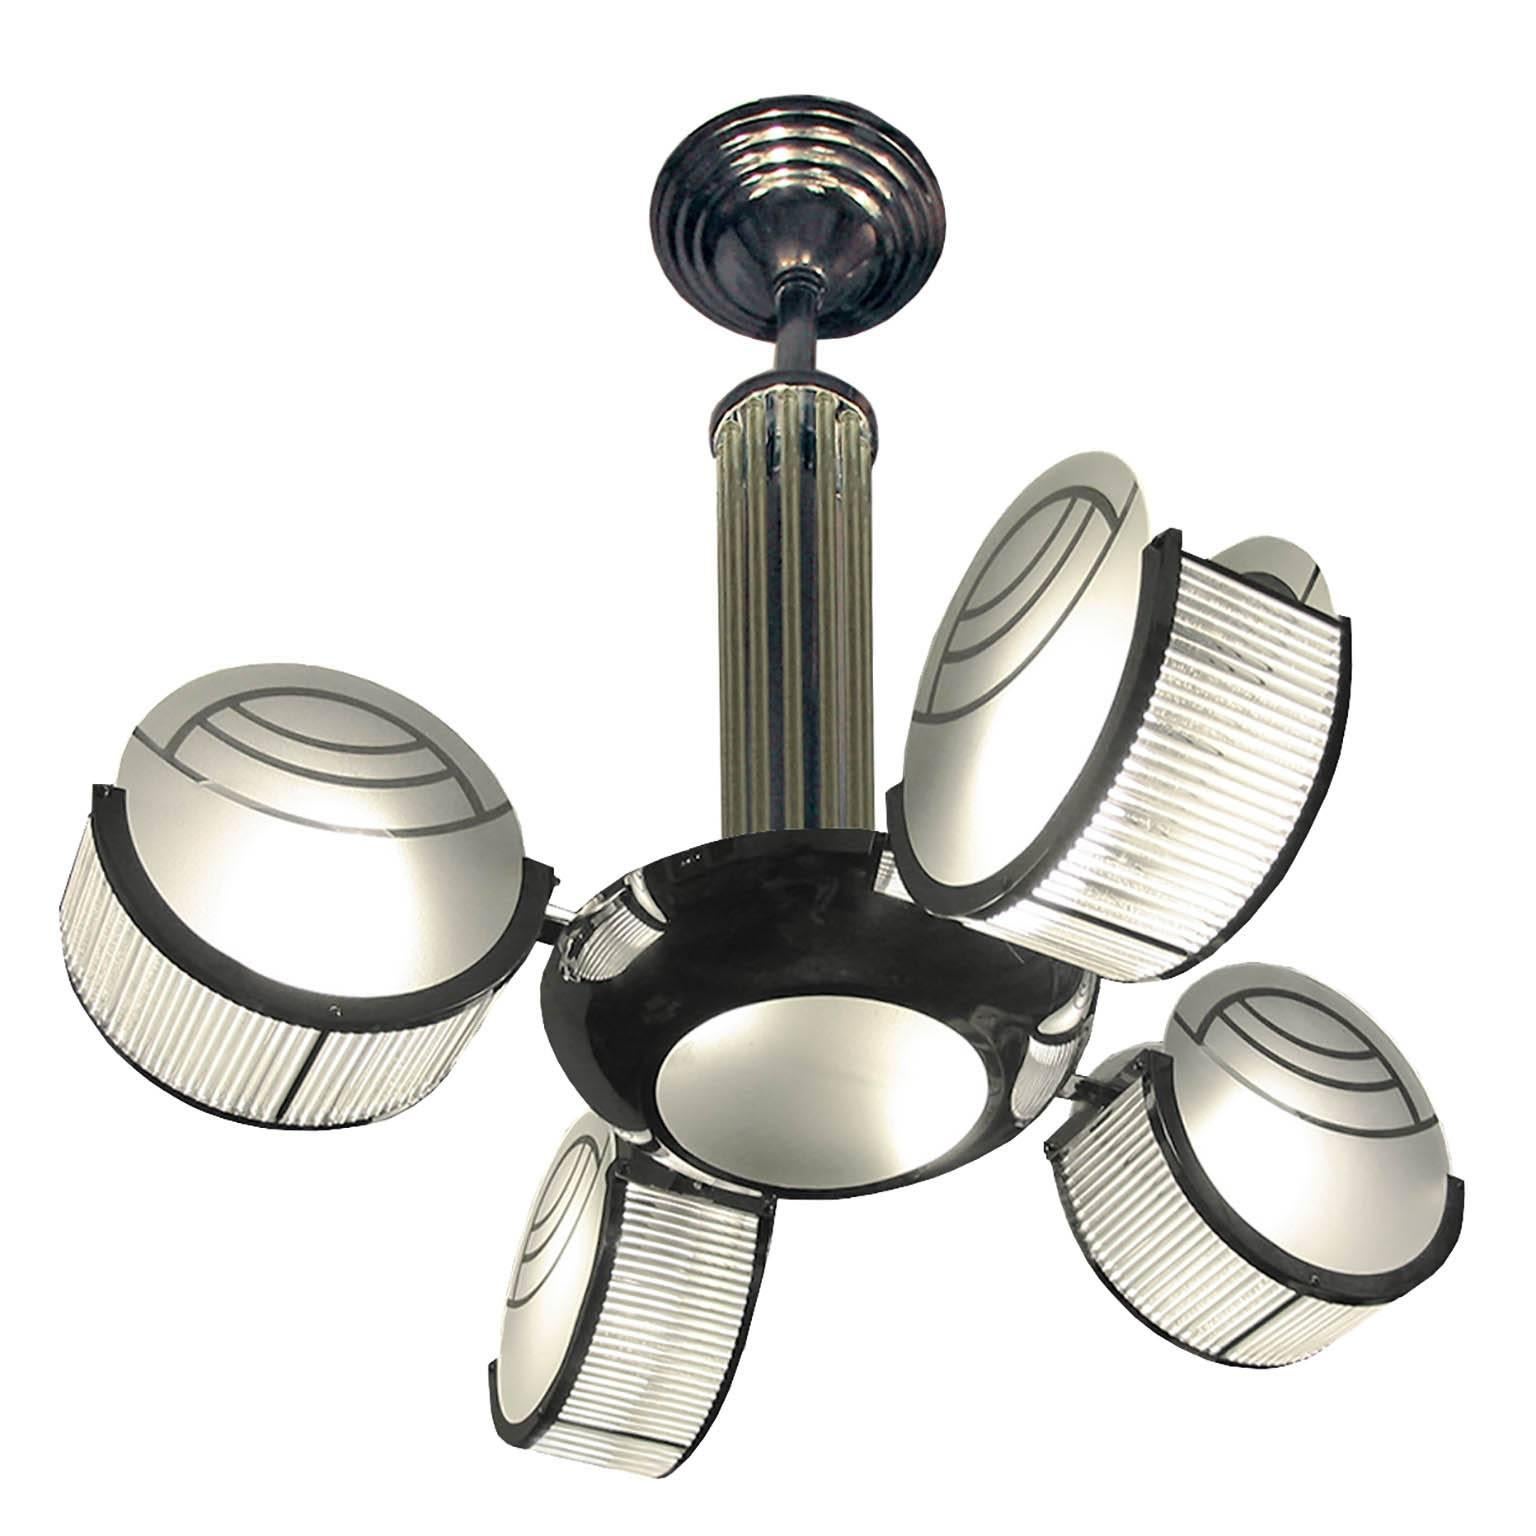 Very Rare Genuine Art Deco Petitot Chandelier

Modernist ceiling lamp with four arms shaped as chromed metal circles, holding satinated glass disks with Art Deco pattern and glass rods.
France, circa 1940.

Dimensions:
Height: 70 cm (27.56